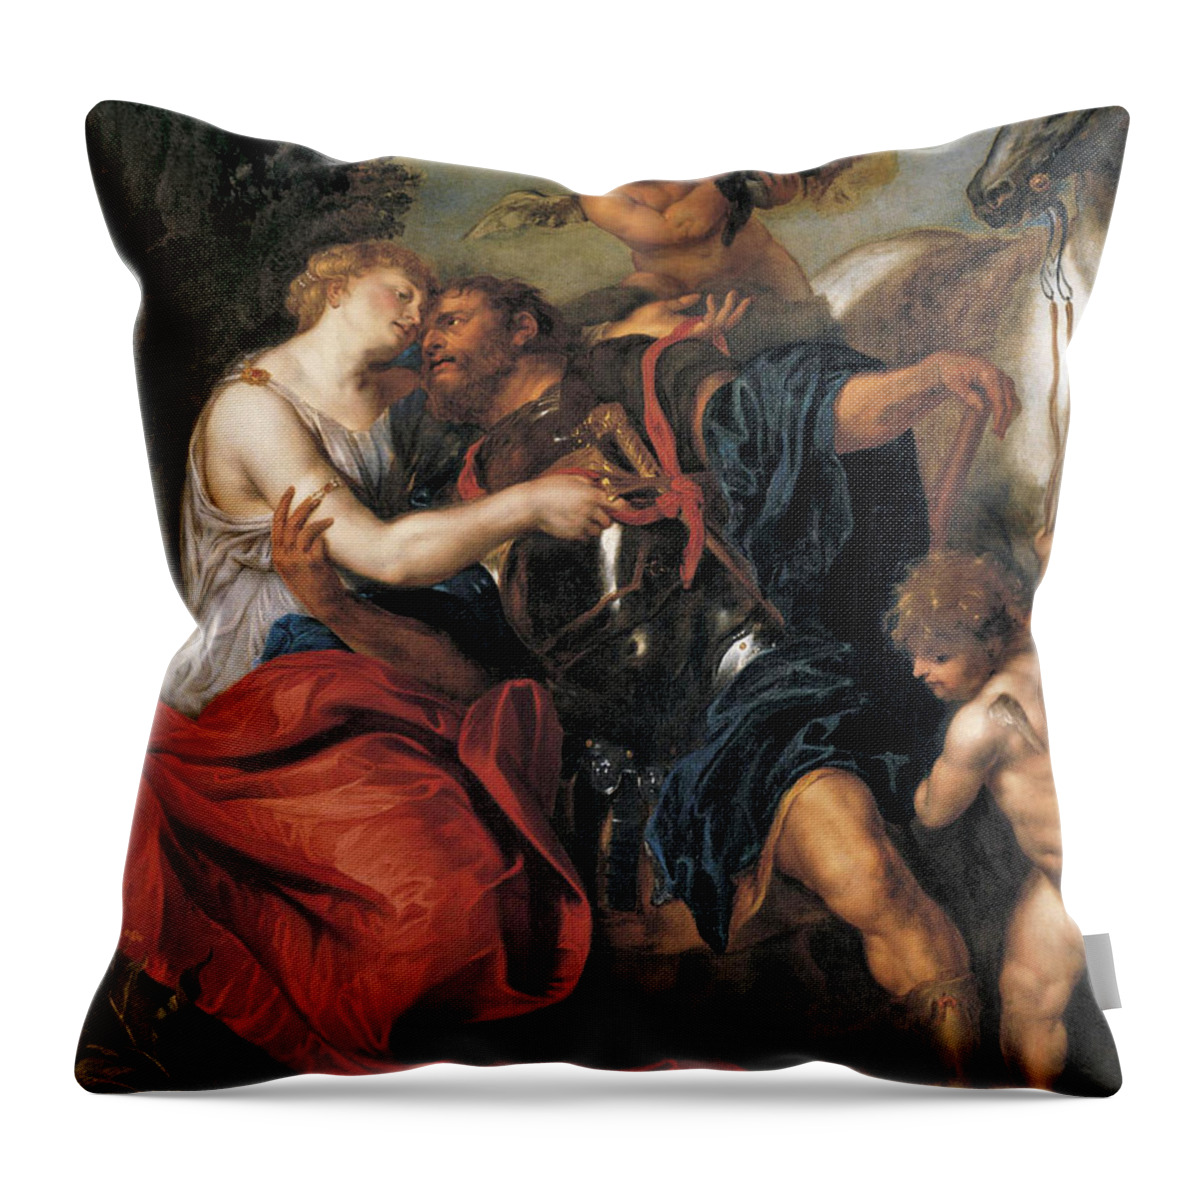 Studio Of Anthony Van Dyck Throw Pillow featuring the painting Venus disarming Mars by Studio of Anthony van Dyck